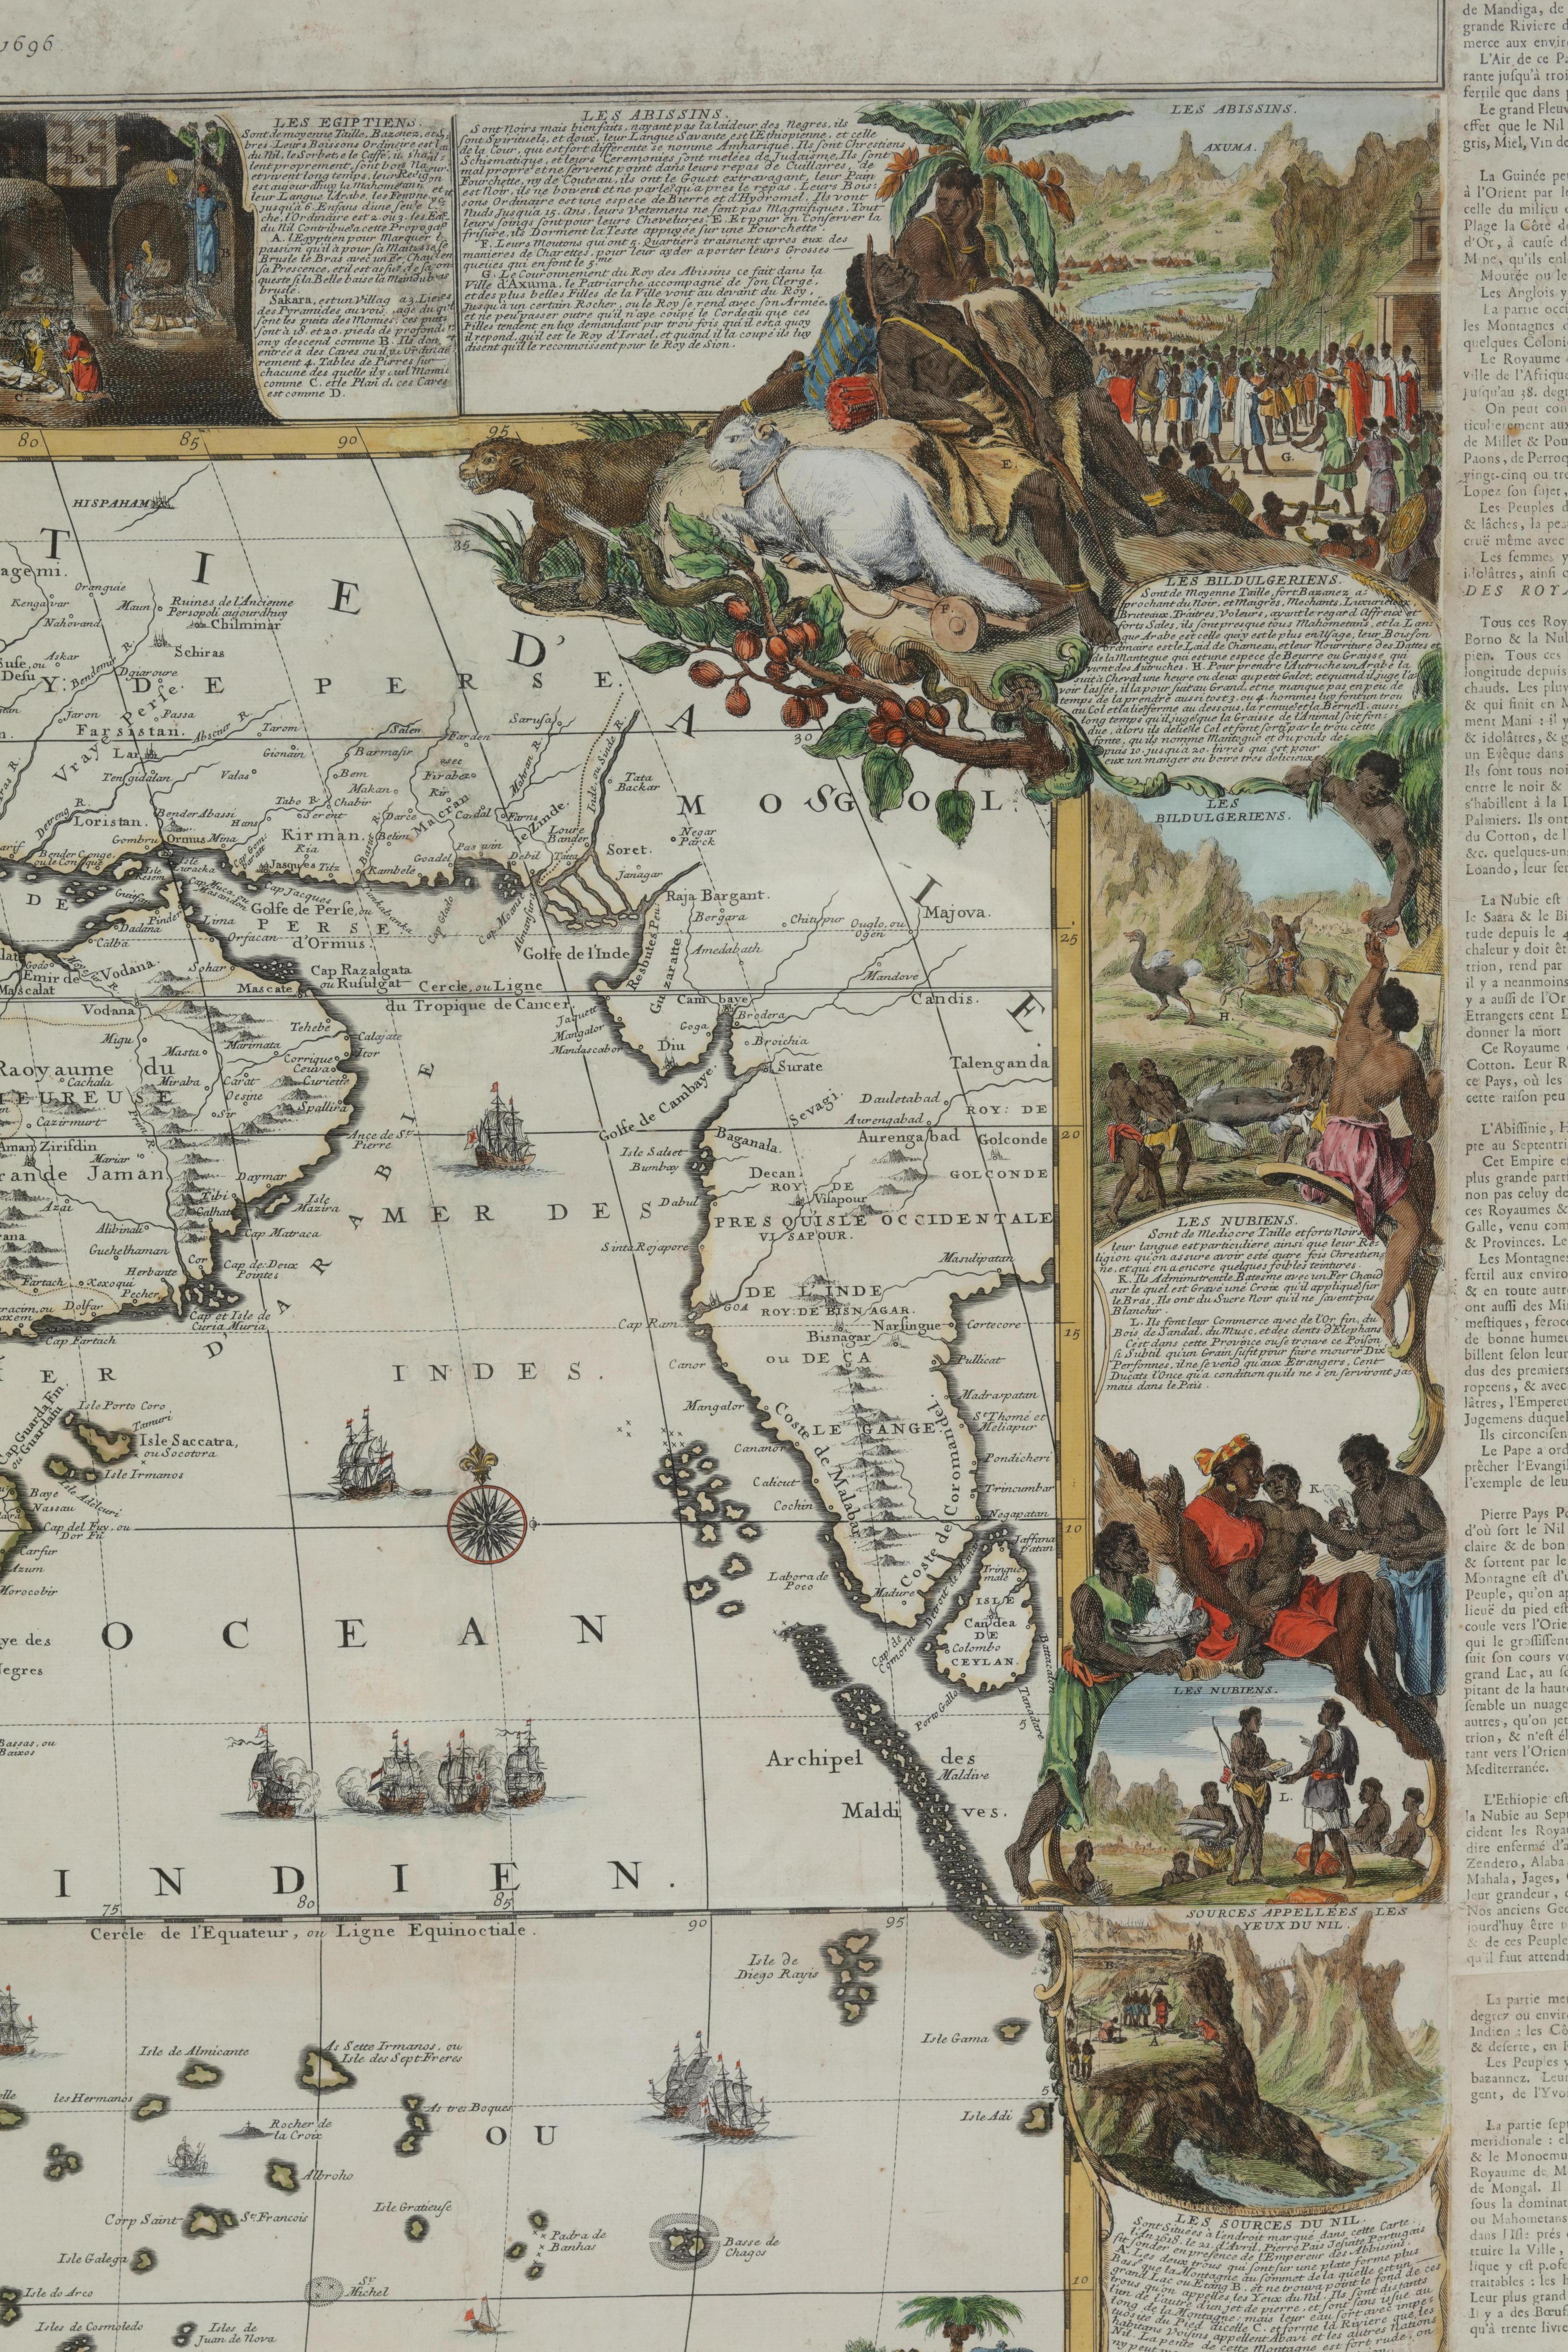 Important giant Map of Africa, for the King of France, 1698 - Print by Nicolas de Fer